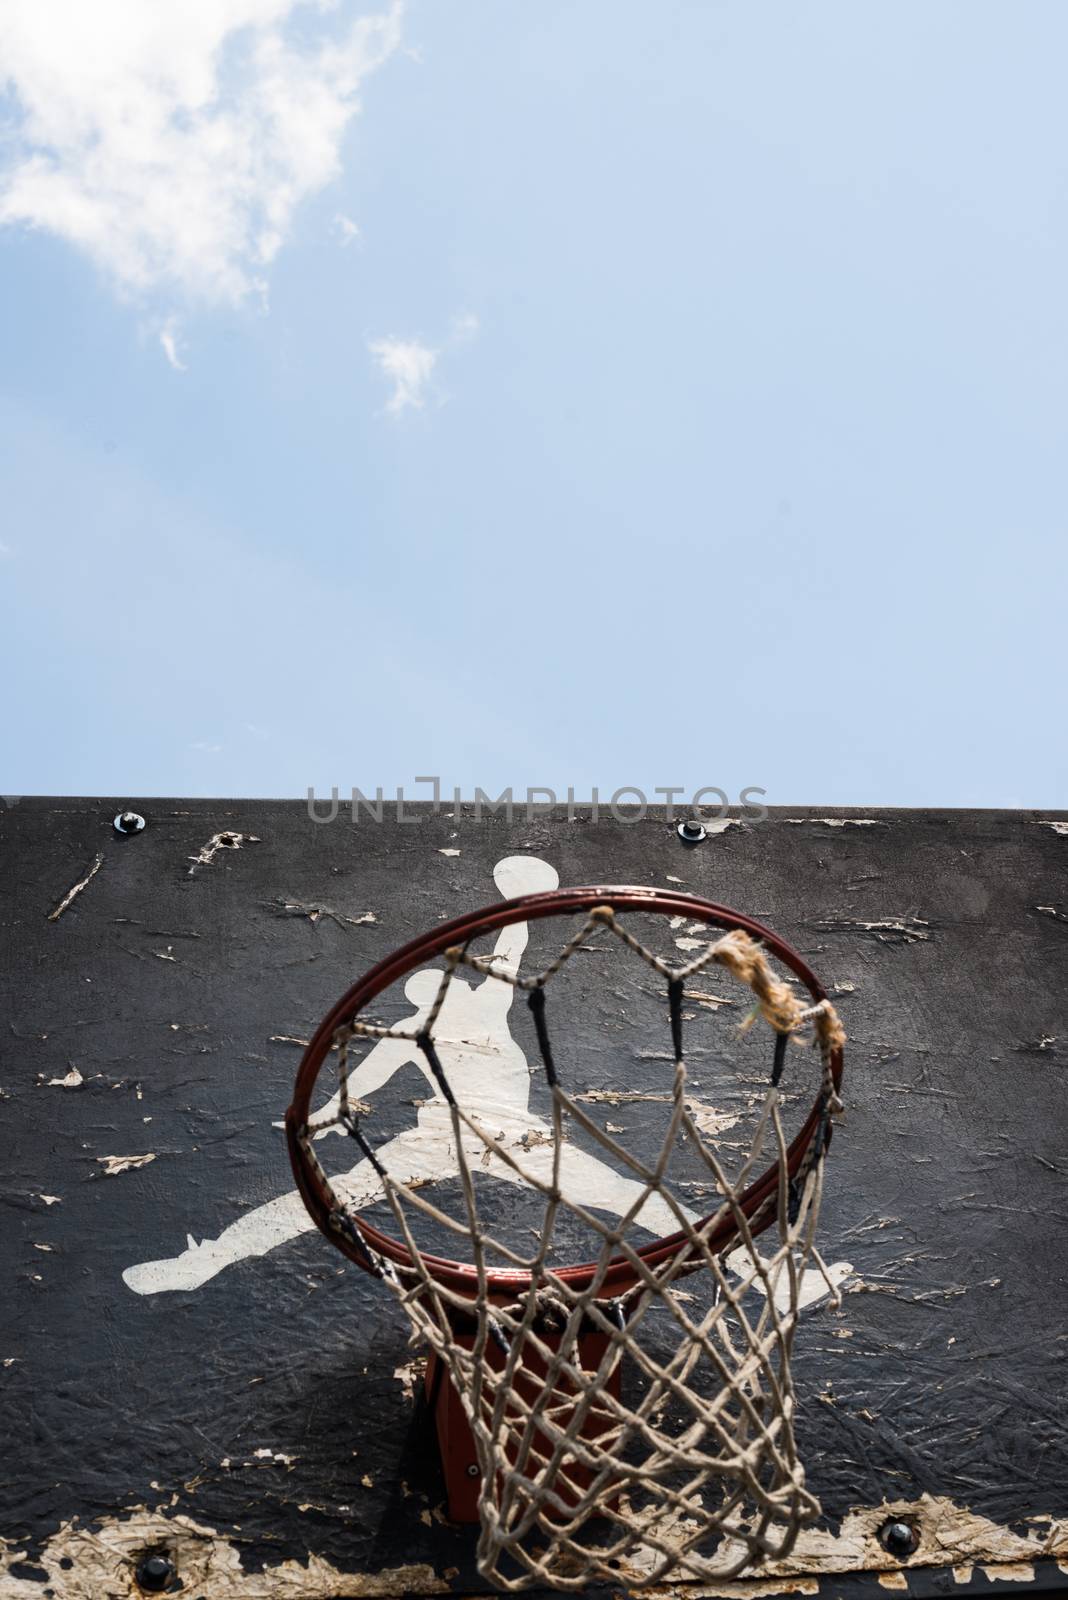 KYIV, UKRAINE -  JUNE 17, 2014: Jumpman logo by Nike painted on the black backboard of the old basketball court in Kyiv.